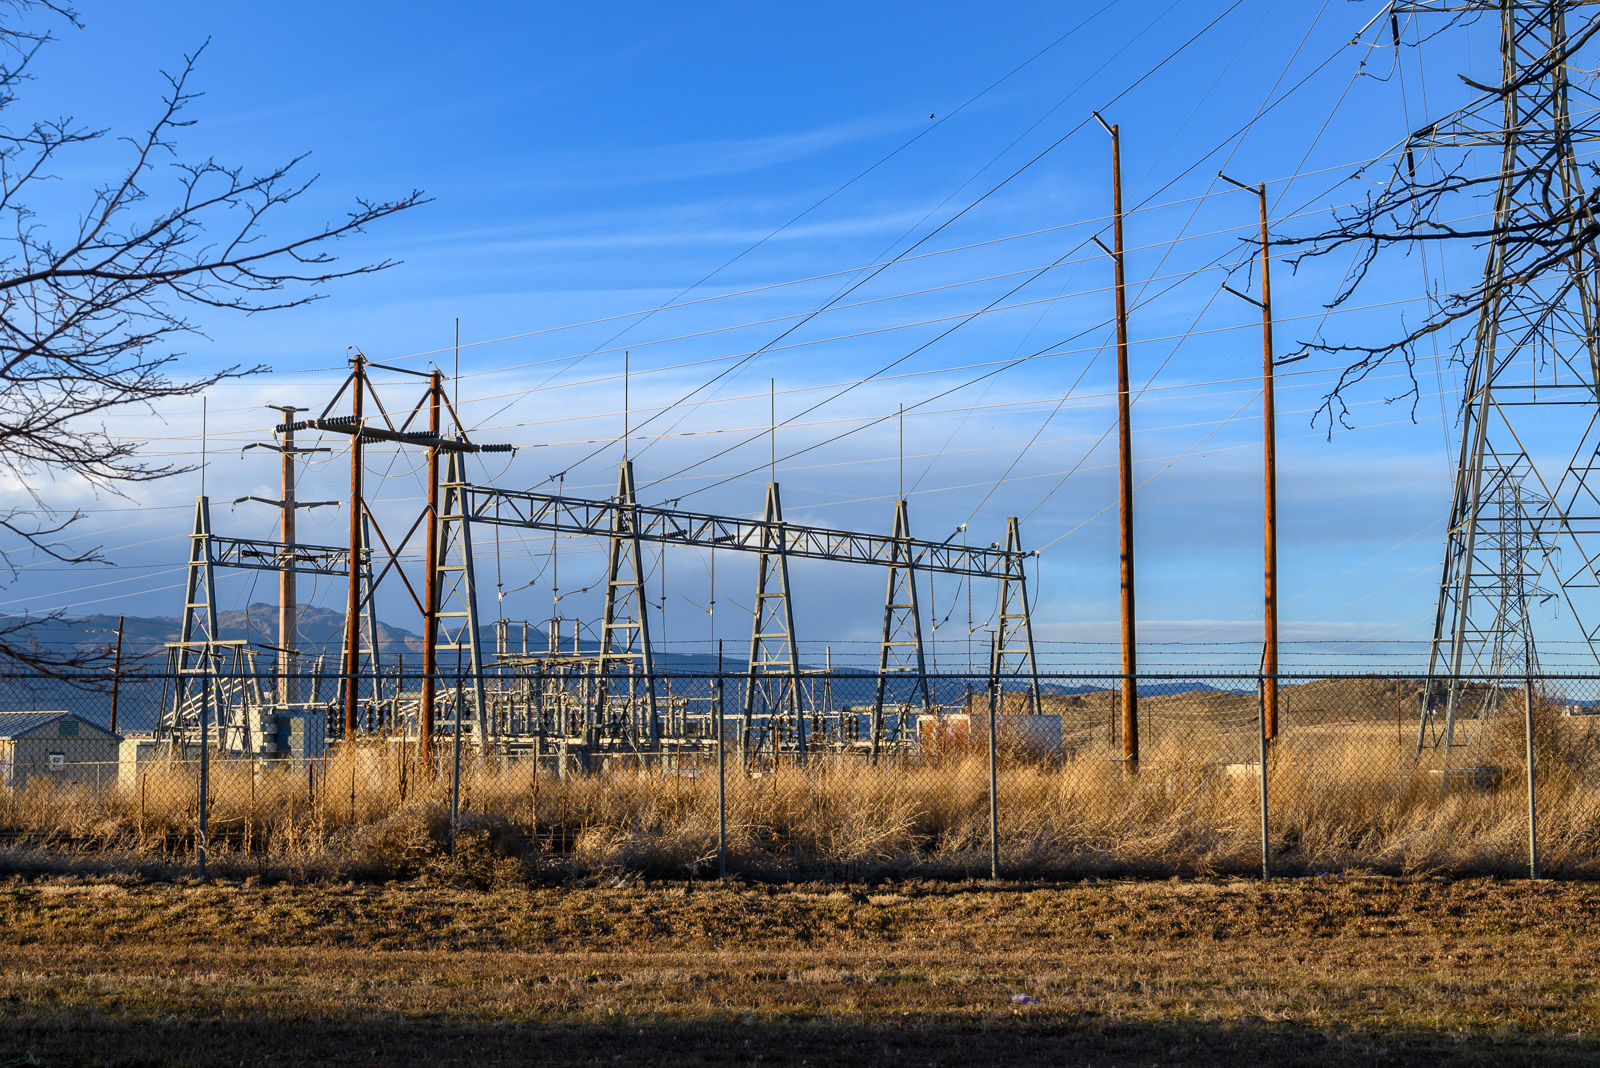 Power poles, transmission towers and electric lines converge at an electric substation near Valmont Power Plant in Boulder, Colorado.